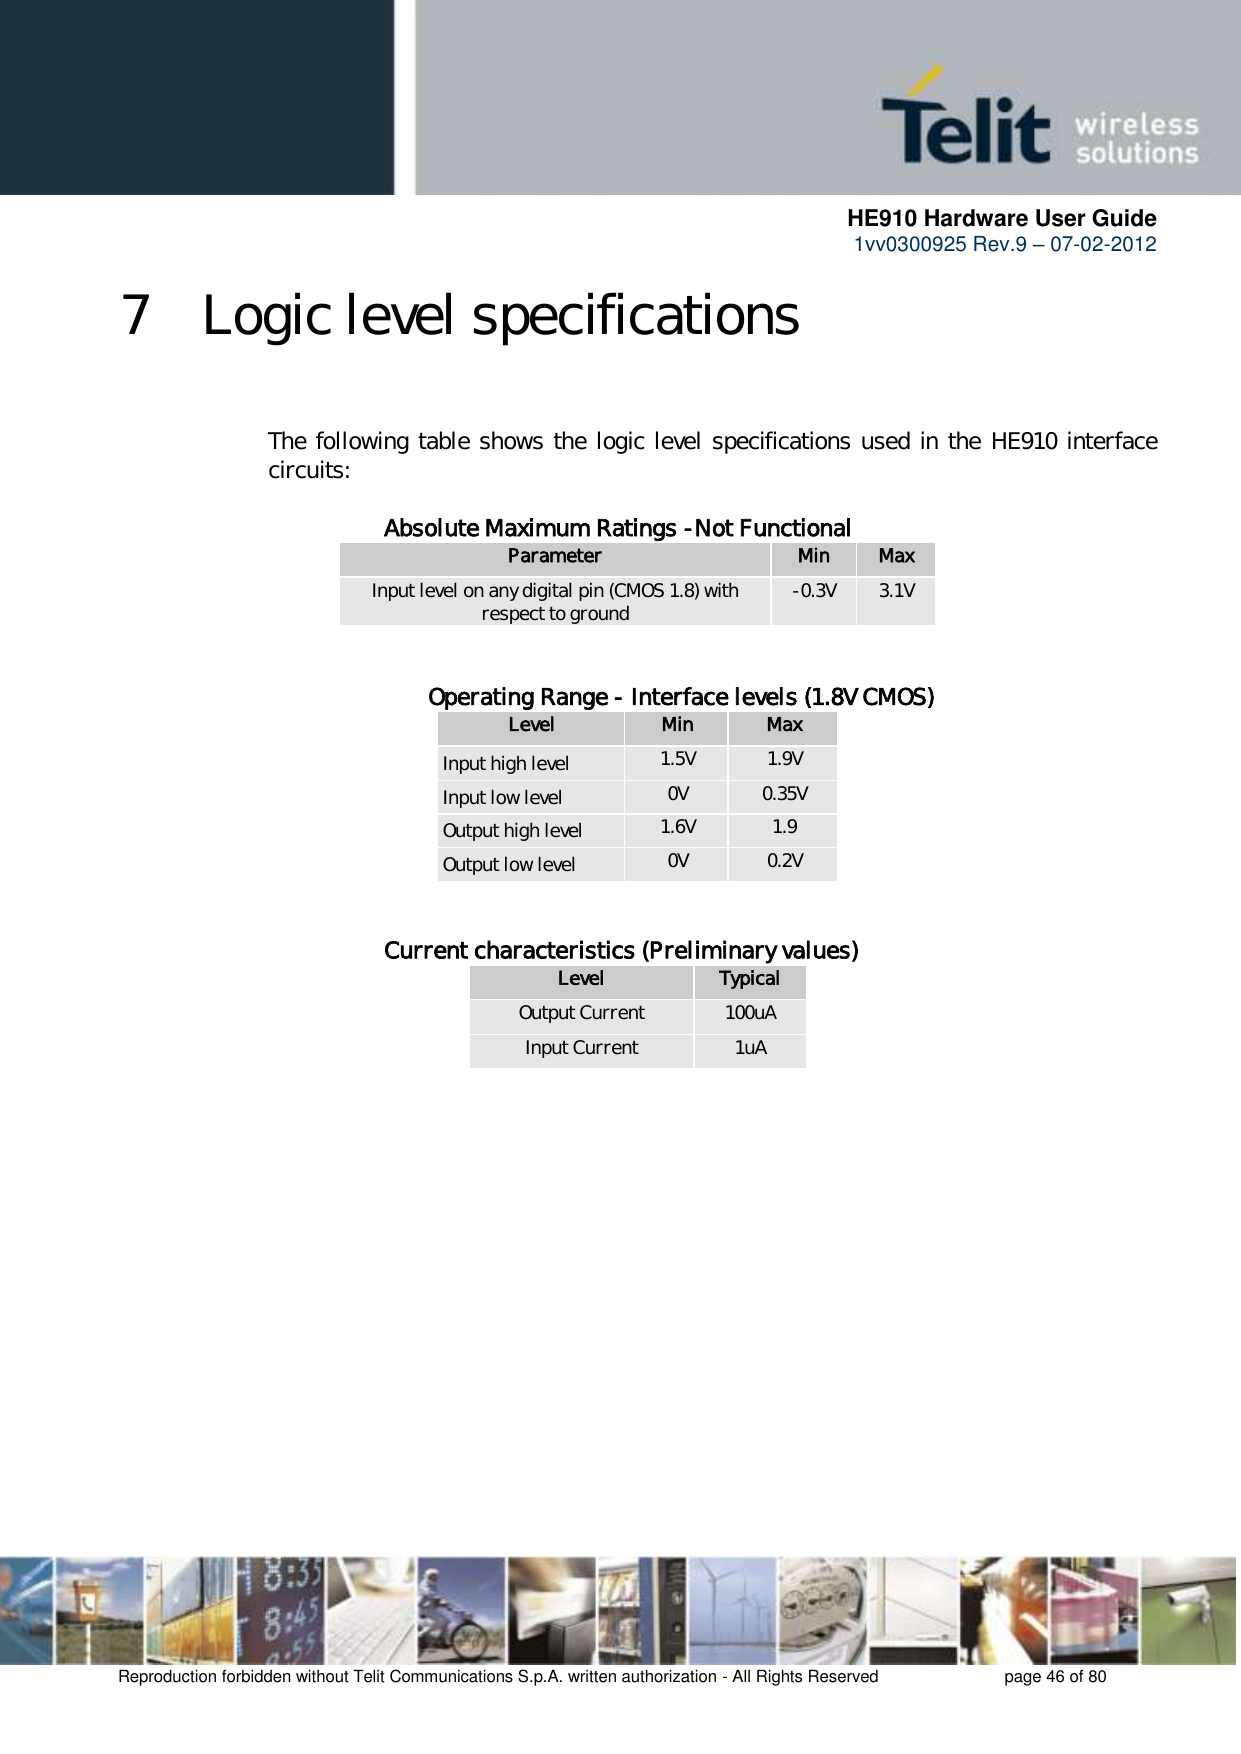      HE910 Hardware User Guide 1vv0300925 Rev.9 – 07-02-2012    Reproduction forbidden without Telit Communications S.p.A. written authorization - All Rights Reserved    page 46 of 80  7 Logic level specifications  The following table shows the logic level specifications used in the  HE910 interface circuits:      Absolute Maximum Ratings -Not Functional Parameter Min Max Input level on any digital pin (CMOS 1.8) with respect to ground -0.3V 3.1V               Operating Range - Interface levels (1.8V CMOS) Level Min Max Input high level 1.5V 1.9V Input low level 0V 0.35V Output high level 1.6V 1.9 Output low level 0V 0.2V       Current characteristics (Preliminary values) Level Typical Output Current 100uA Input Current 1uA 